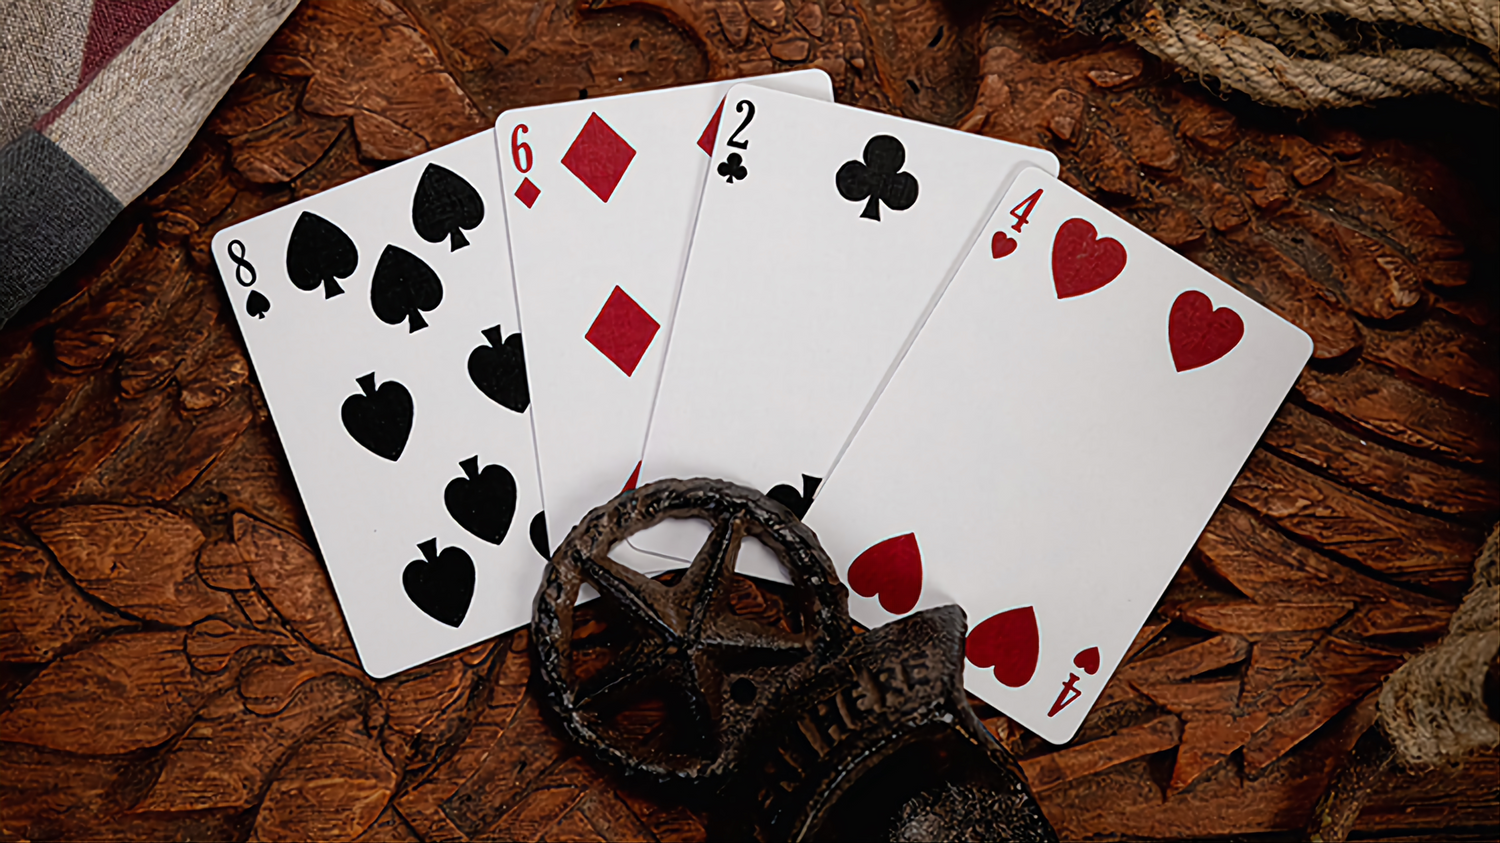 Eric Church Playing Cards by Kings Wild Project : Playing Cards, Poker, Magic, Cardistry,Singapore